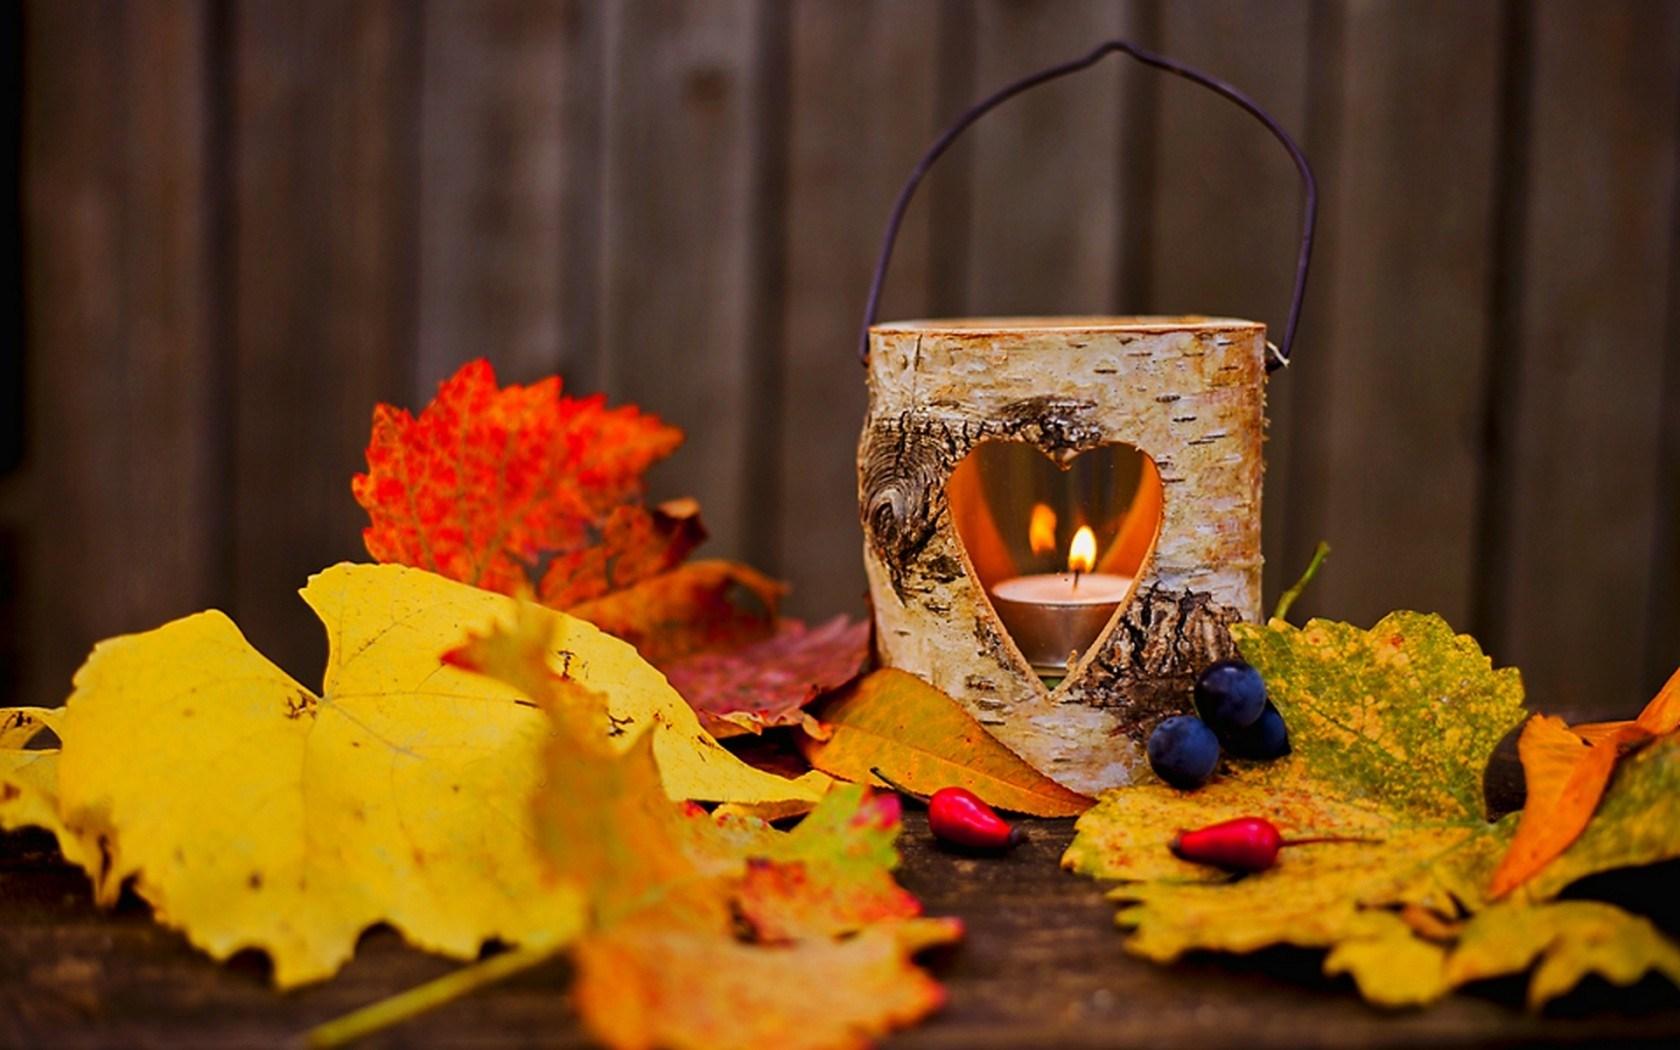 Candle Light In Autumn - HD Wallpaper 